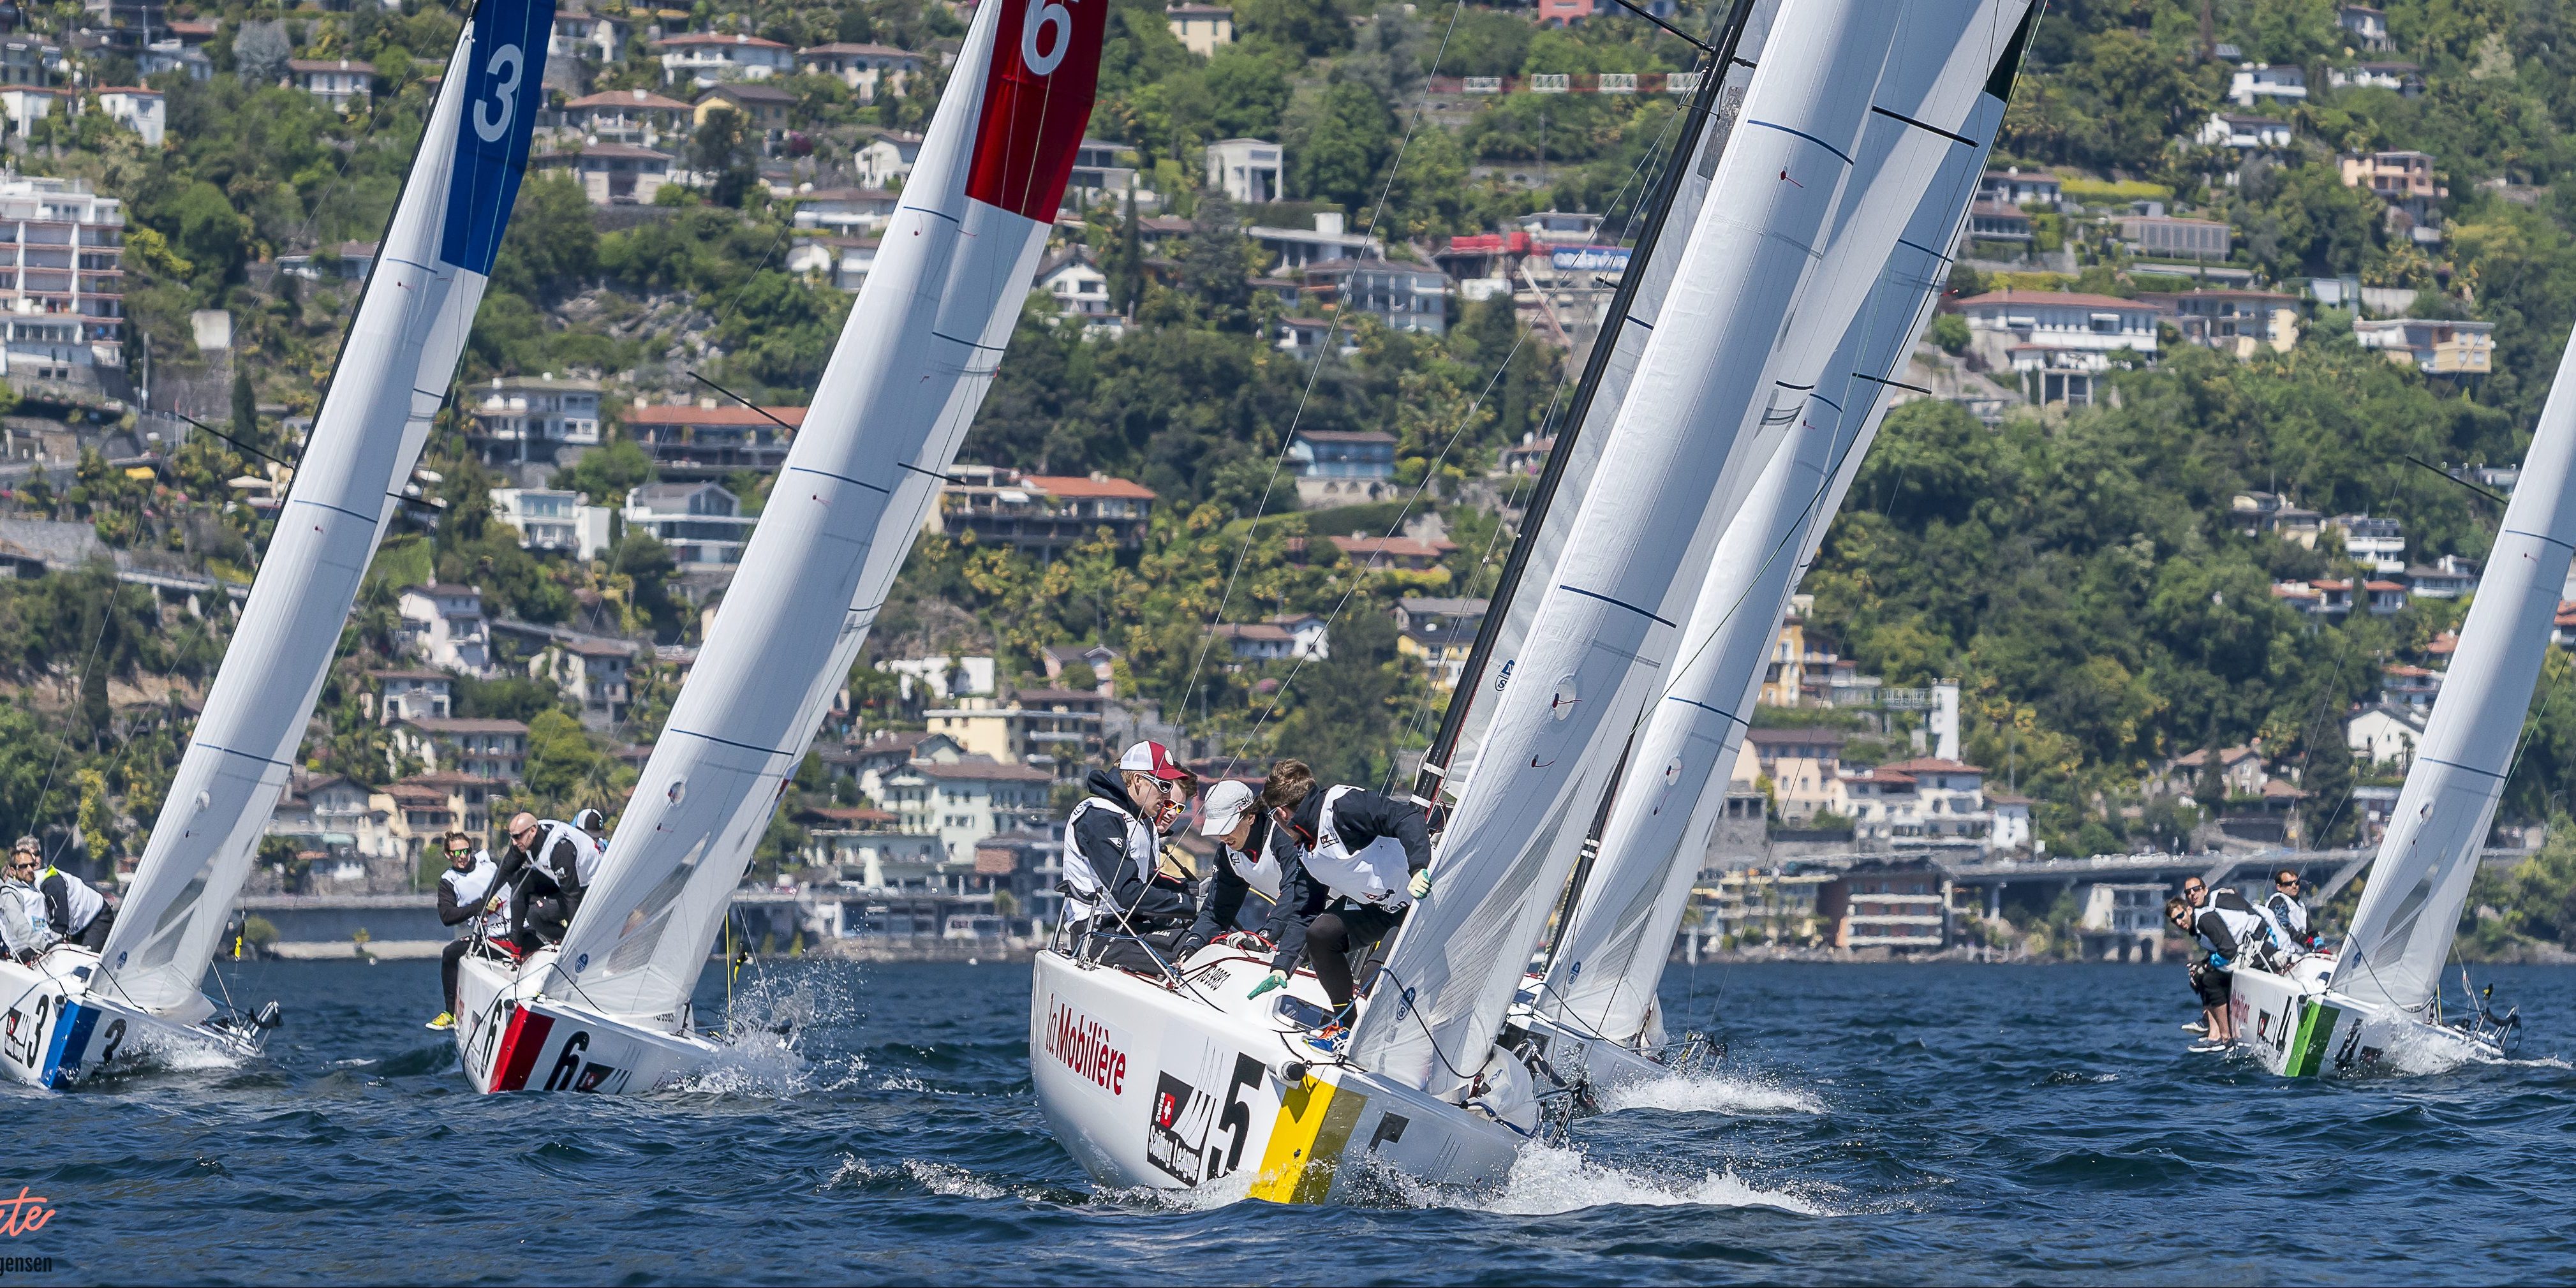  Swiss Sailing Super League  Locarno, Act 1  Start today